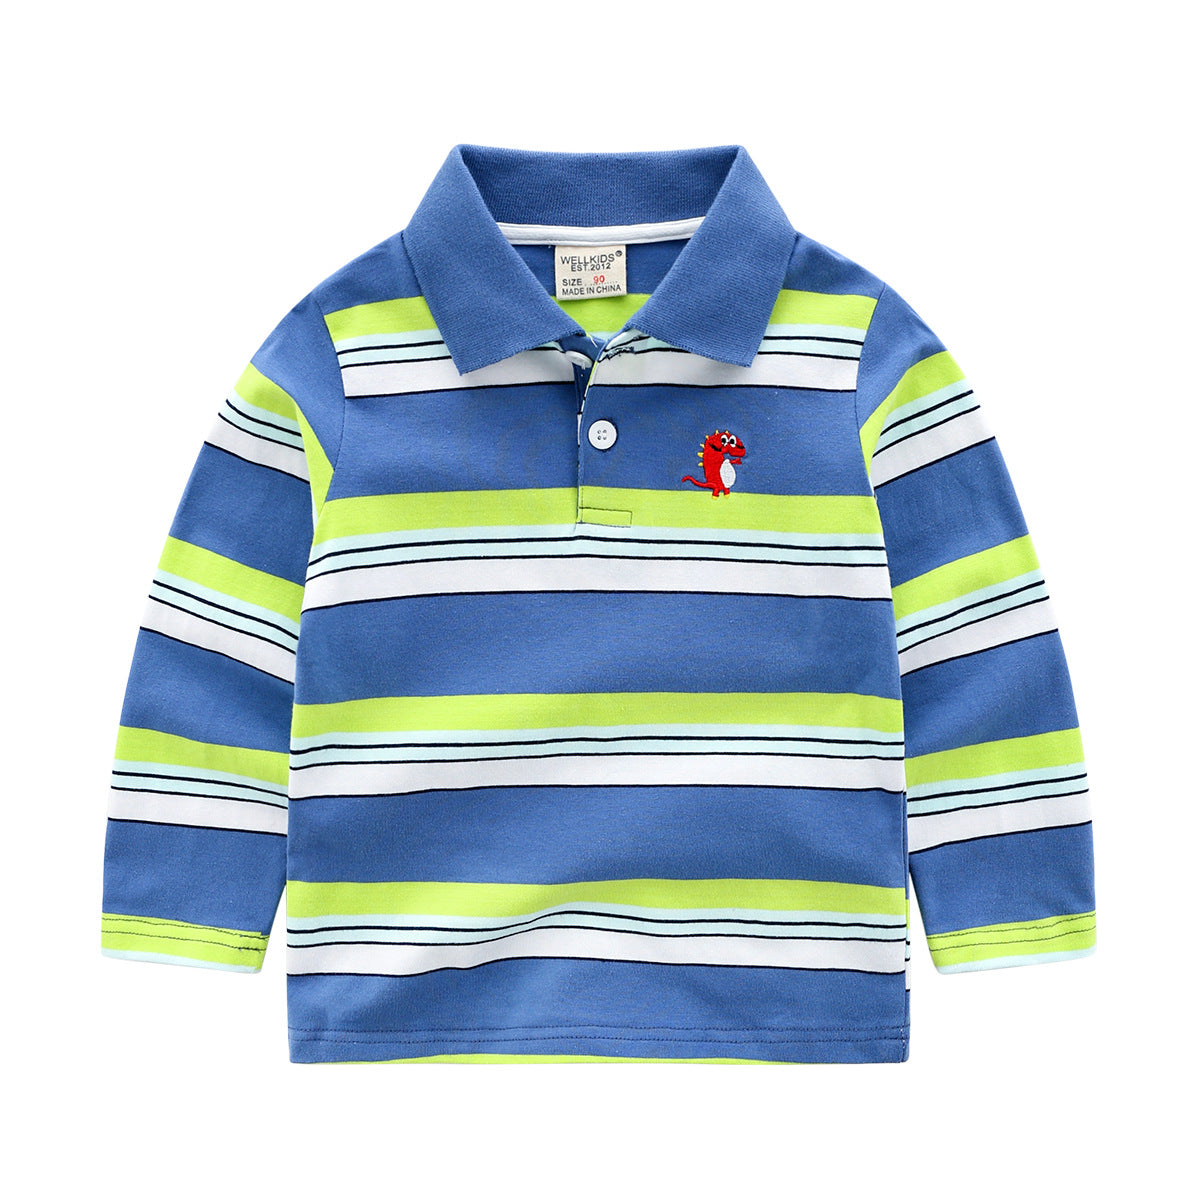 Boys Casual Striped Long Sleeve T-Shirt - Made in China - Soft Cotton Fabric - Non-Hooded - Ages 3-8 Years - Lapel Collar - Farefe